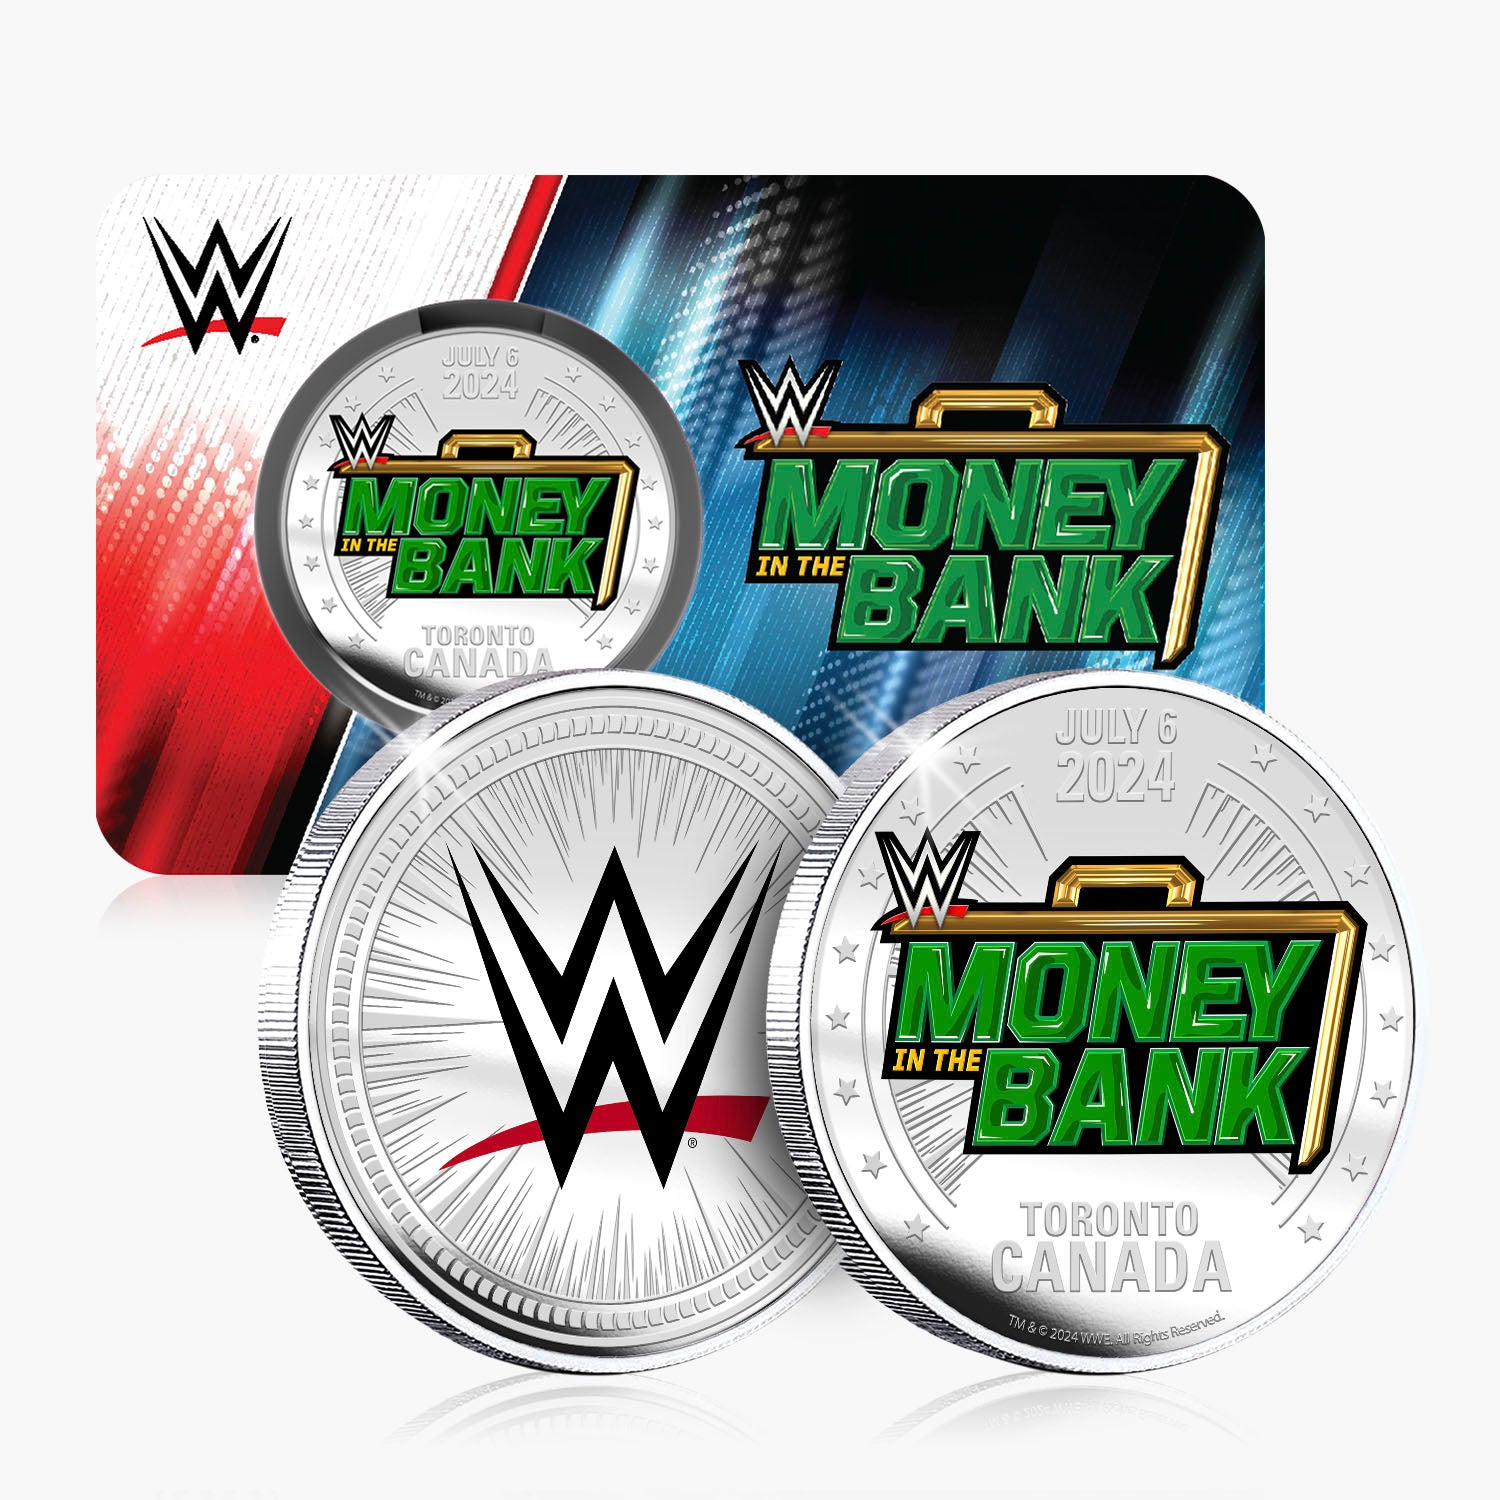 WWE Official Money in the Bank Premium Live Event Commemorative